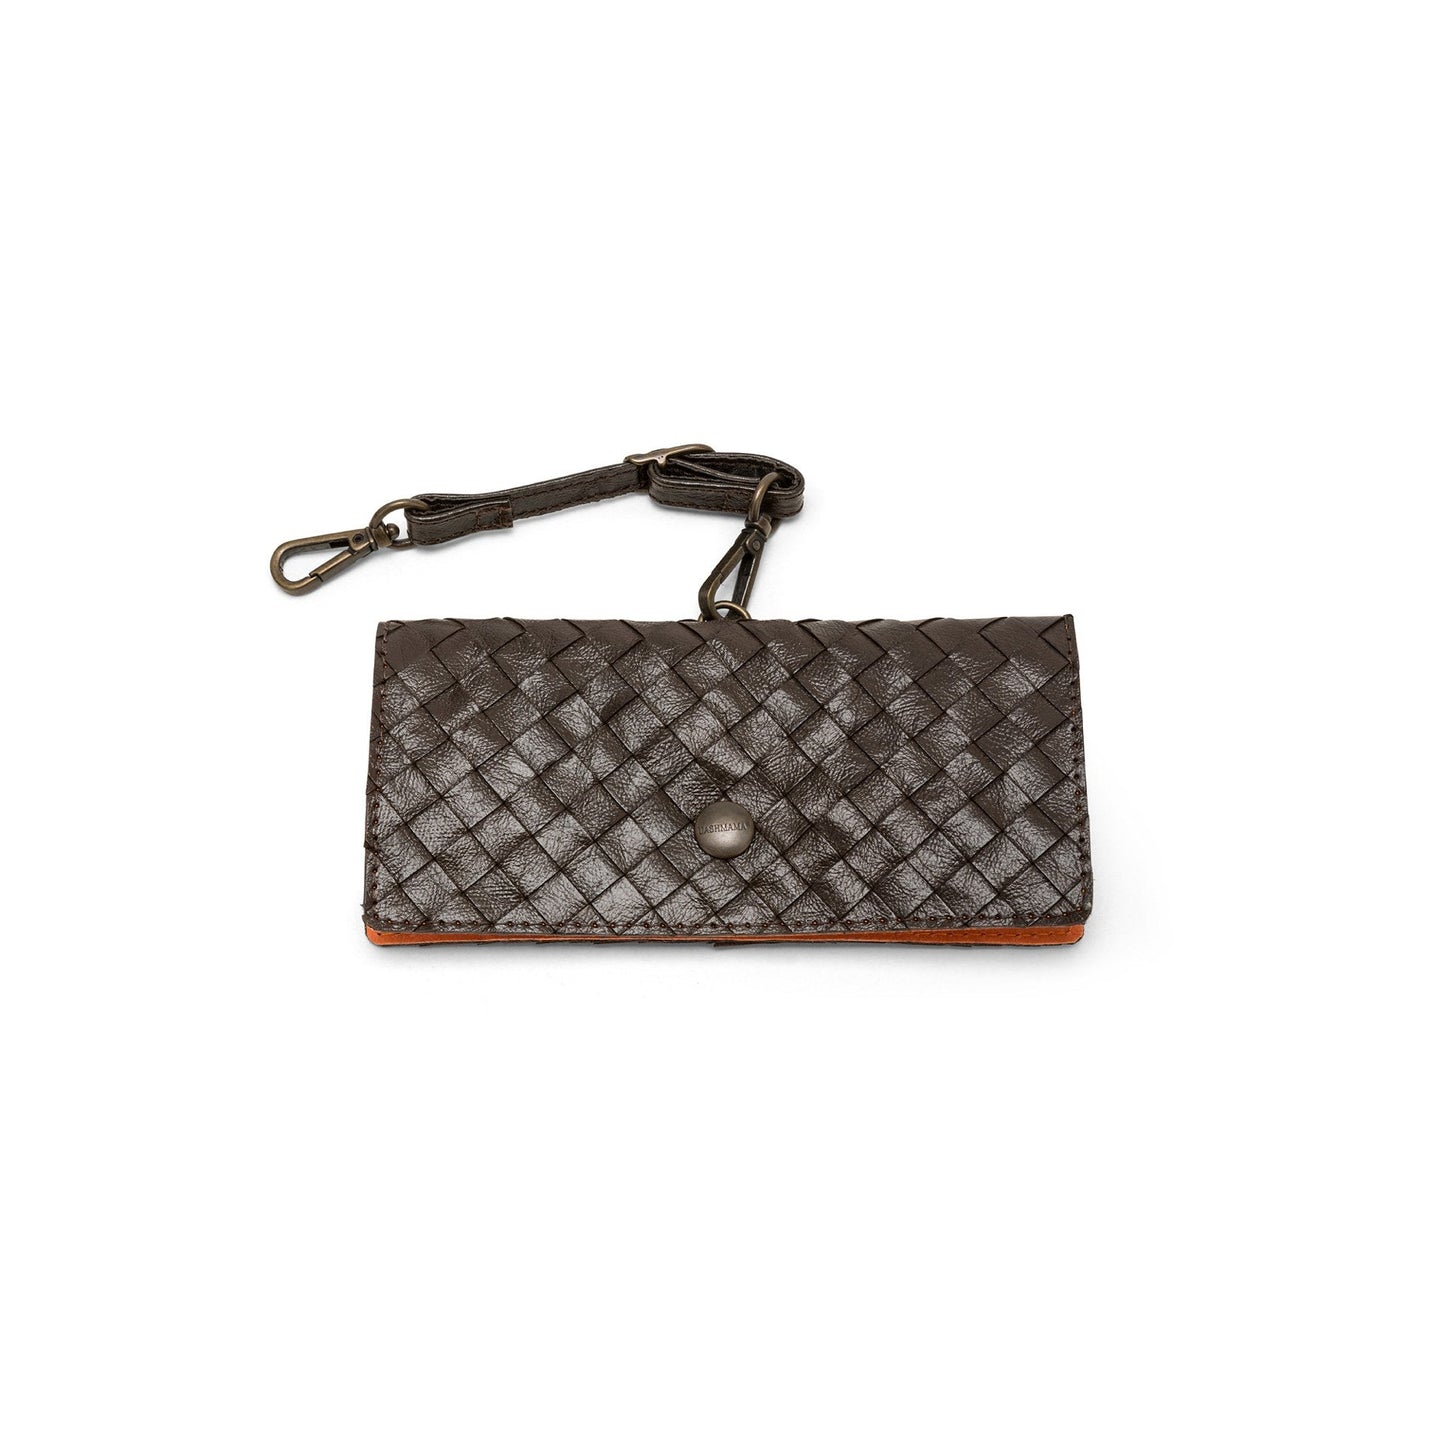 A chocolate brown woven washable paper glasses case is shown, with a metal stud closure and a washable paper strap attachment.